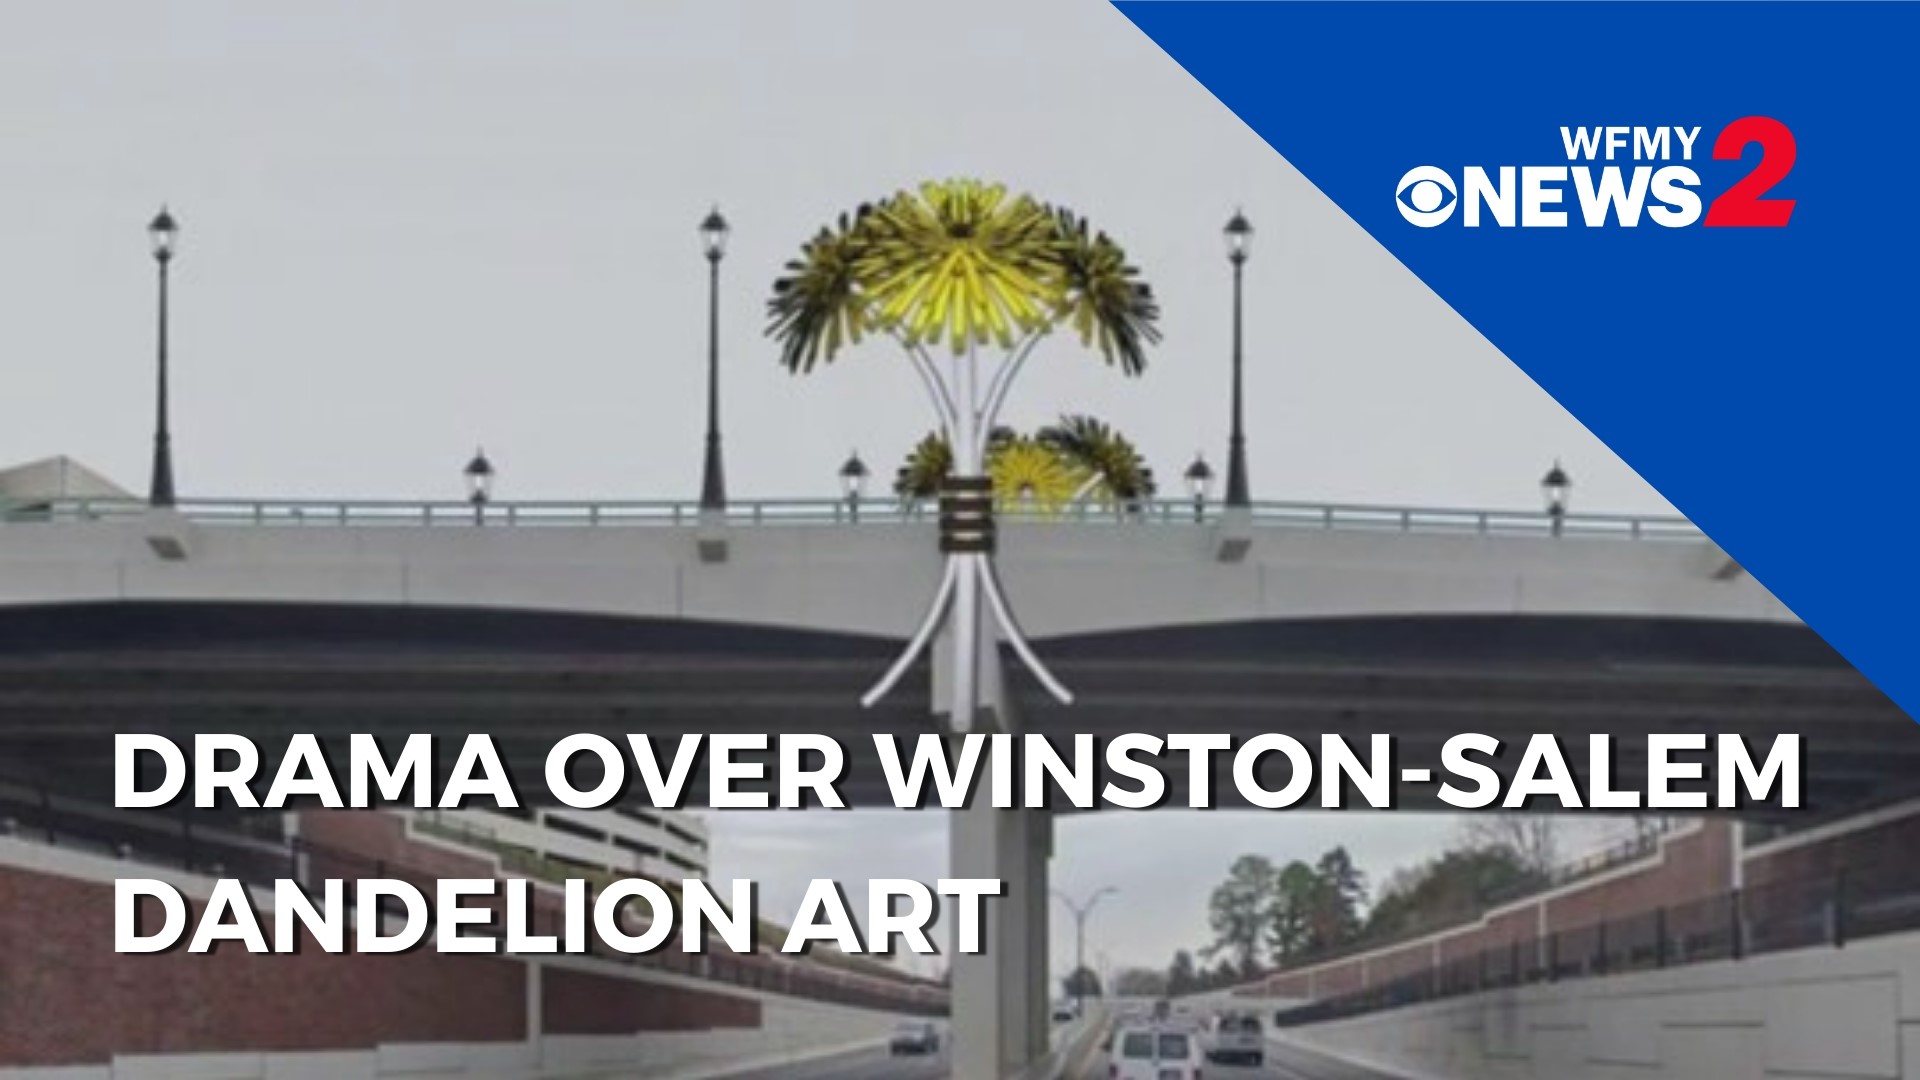 A 40-feet tall dandelion and a pair of 12-foot tall bouquets will decorate a portion of the highway.